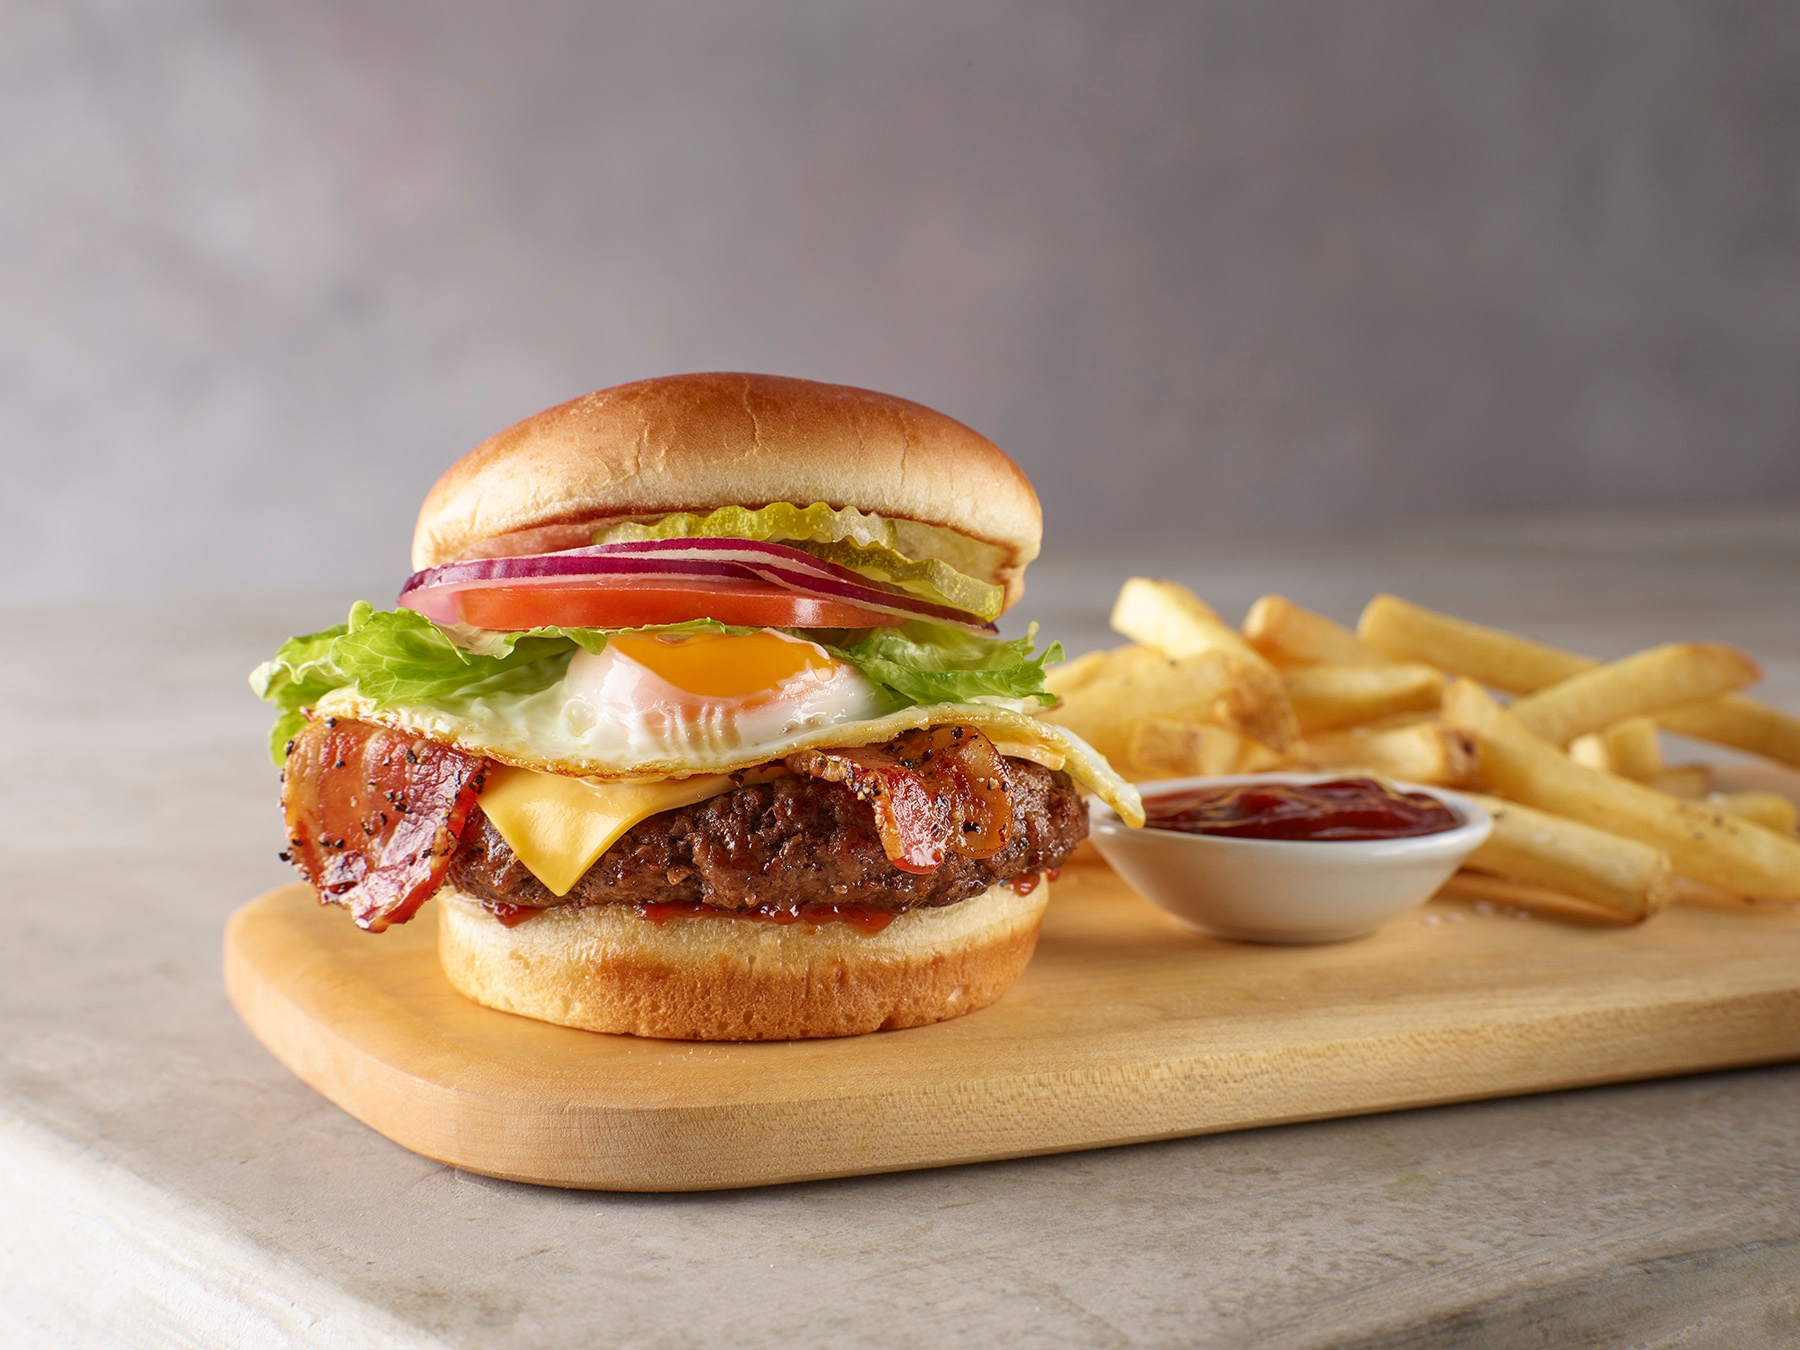 A juicy beef patty topped with chipotle ketchup, American cheese, bacon, and a fried egg. The ultimate brunch burger.